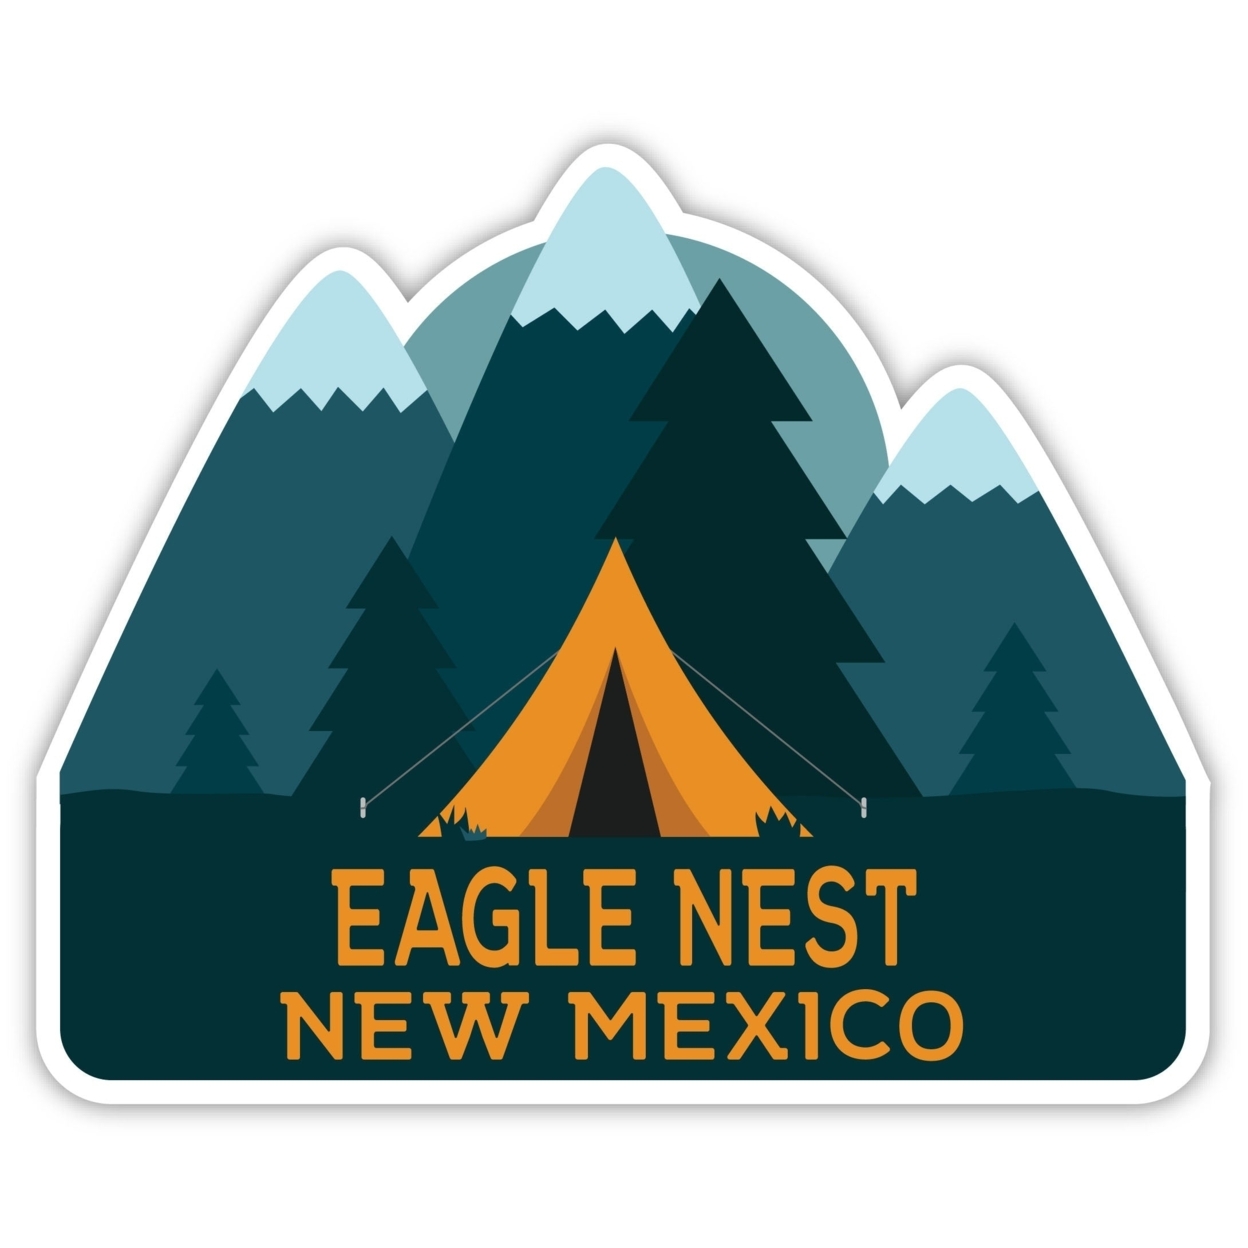 Eagle Nest New Mexico Souvenir Decorative Stickers (Choose Theme And Size) - 4-Pack, 10-Inch, Tent